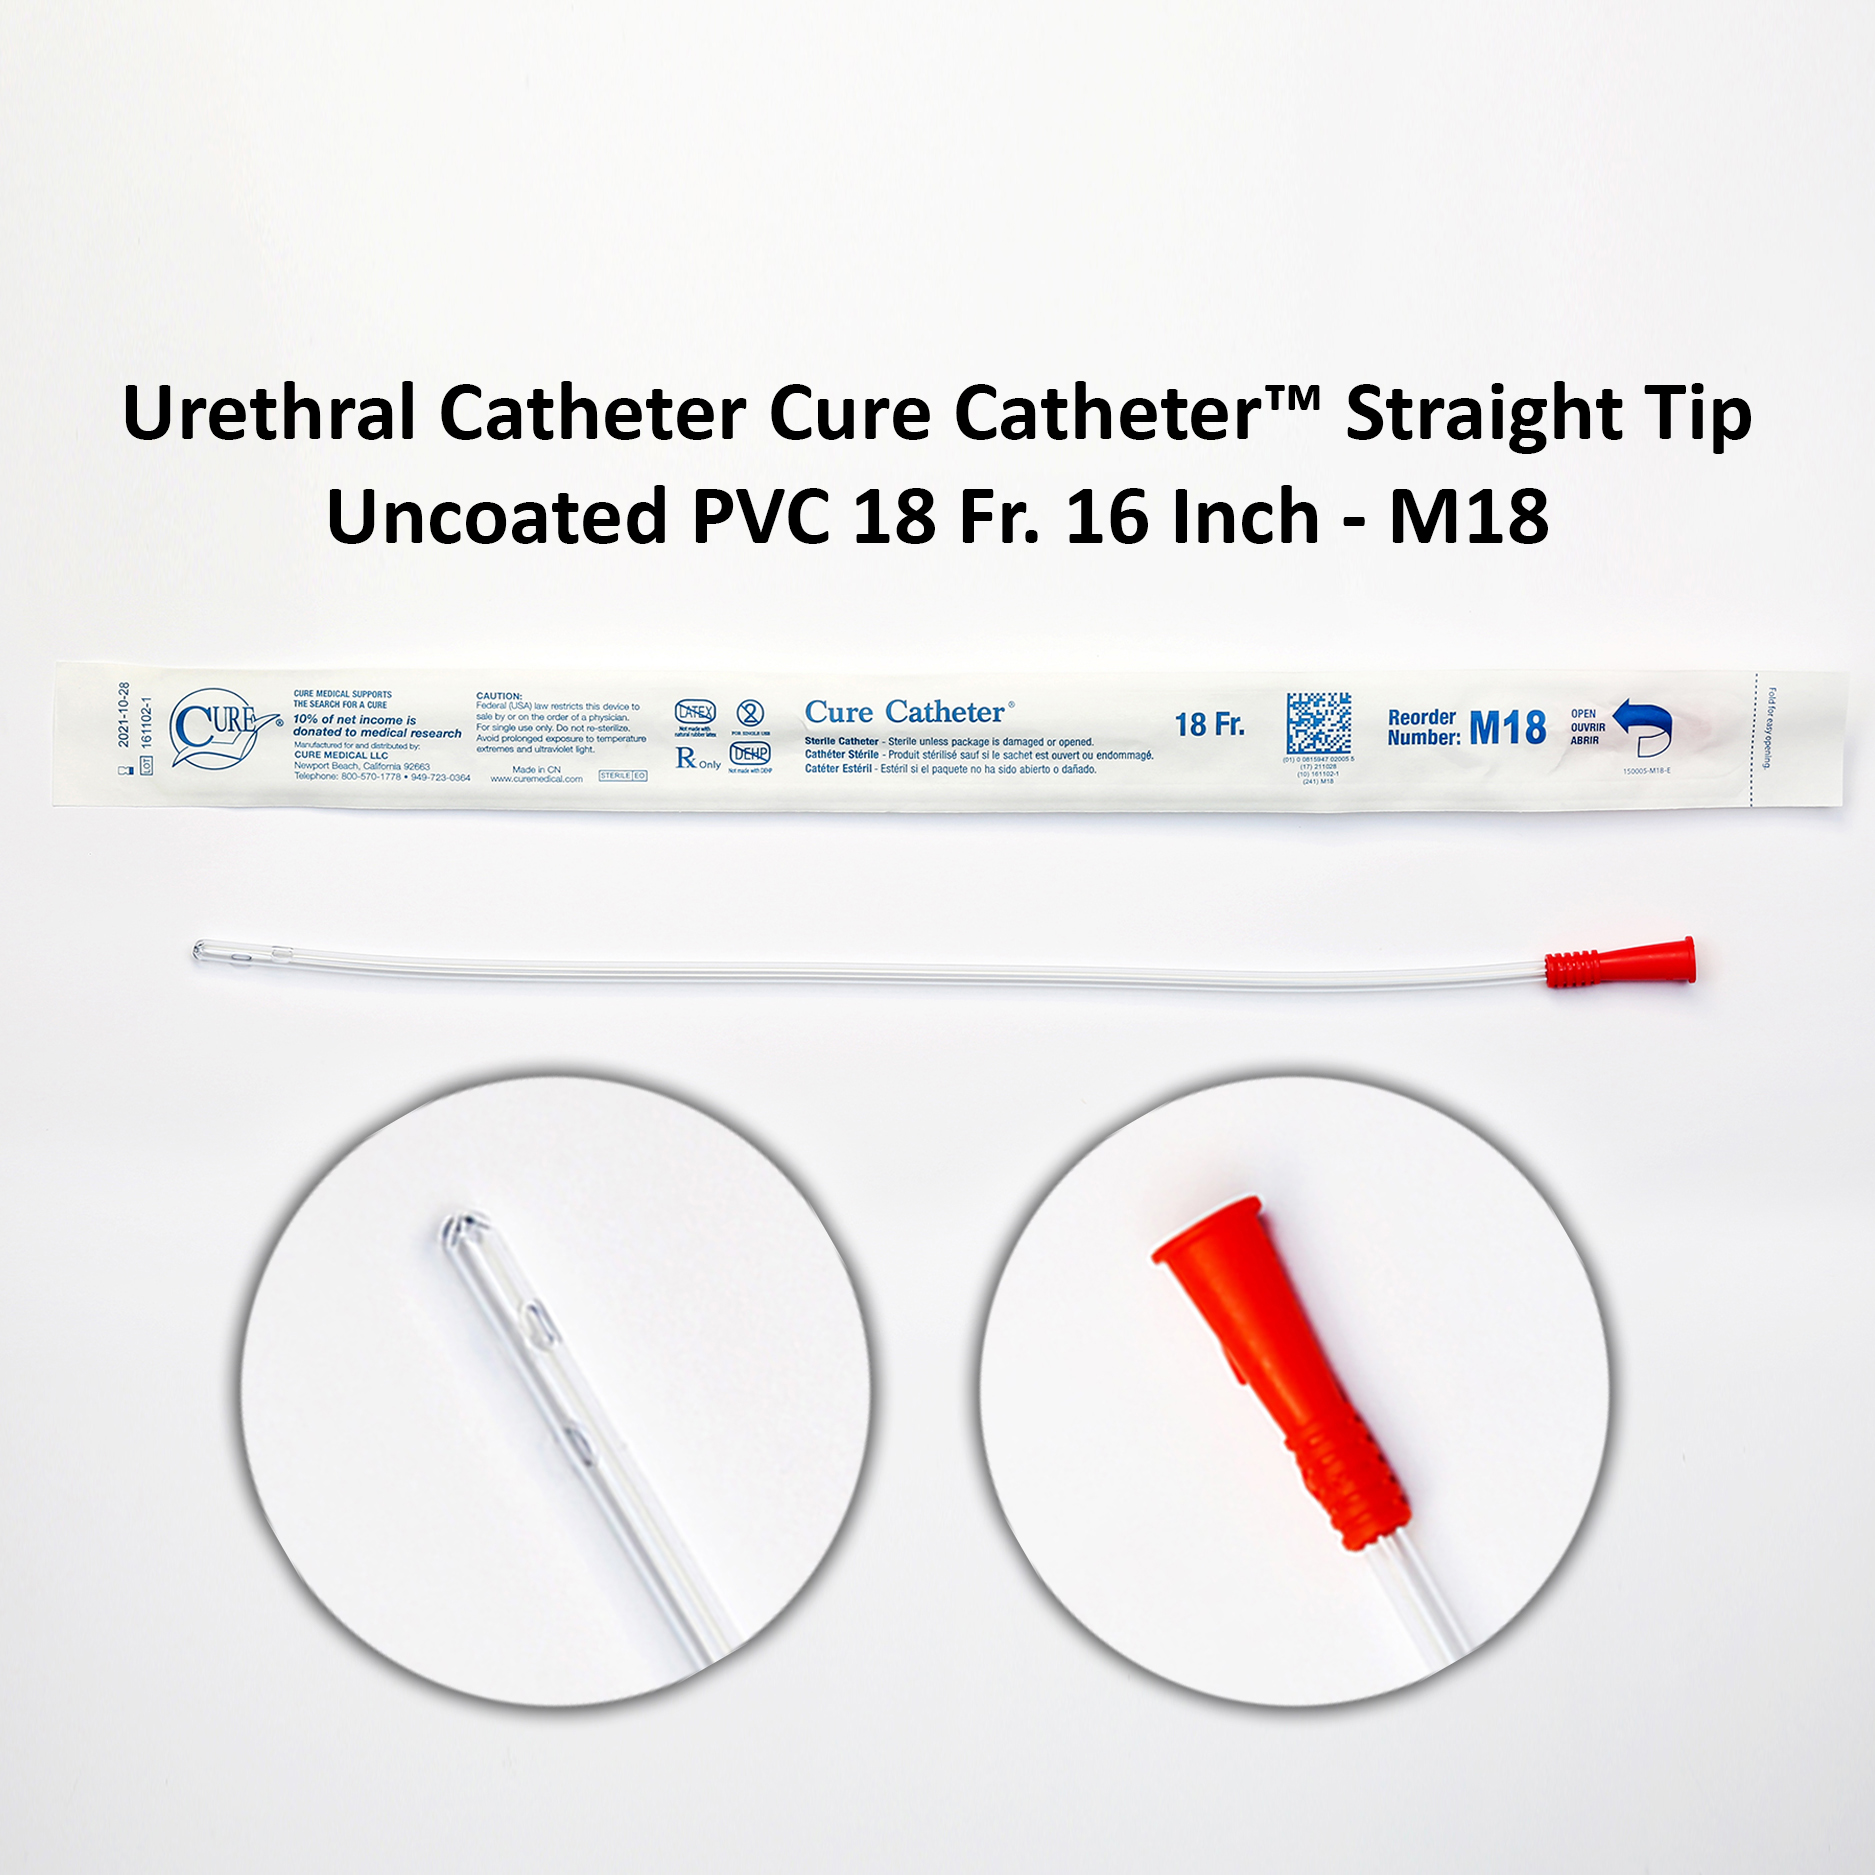 Urethral Catheter Cure Catheter™ Straight Tip Uncoated PVC 18 Fr. 16 Inch - M18